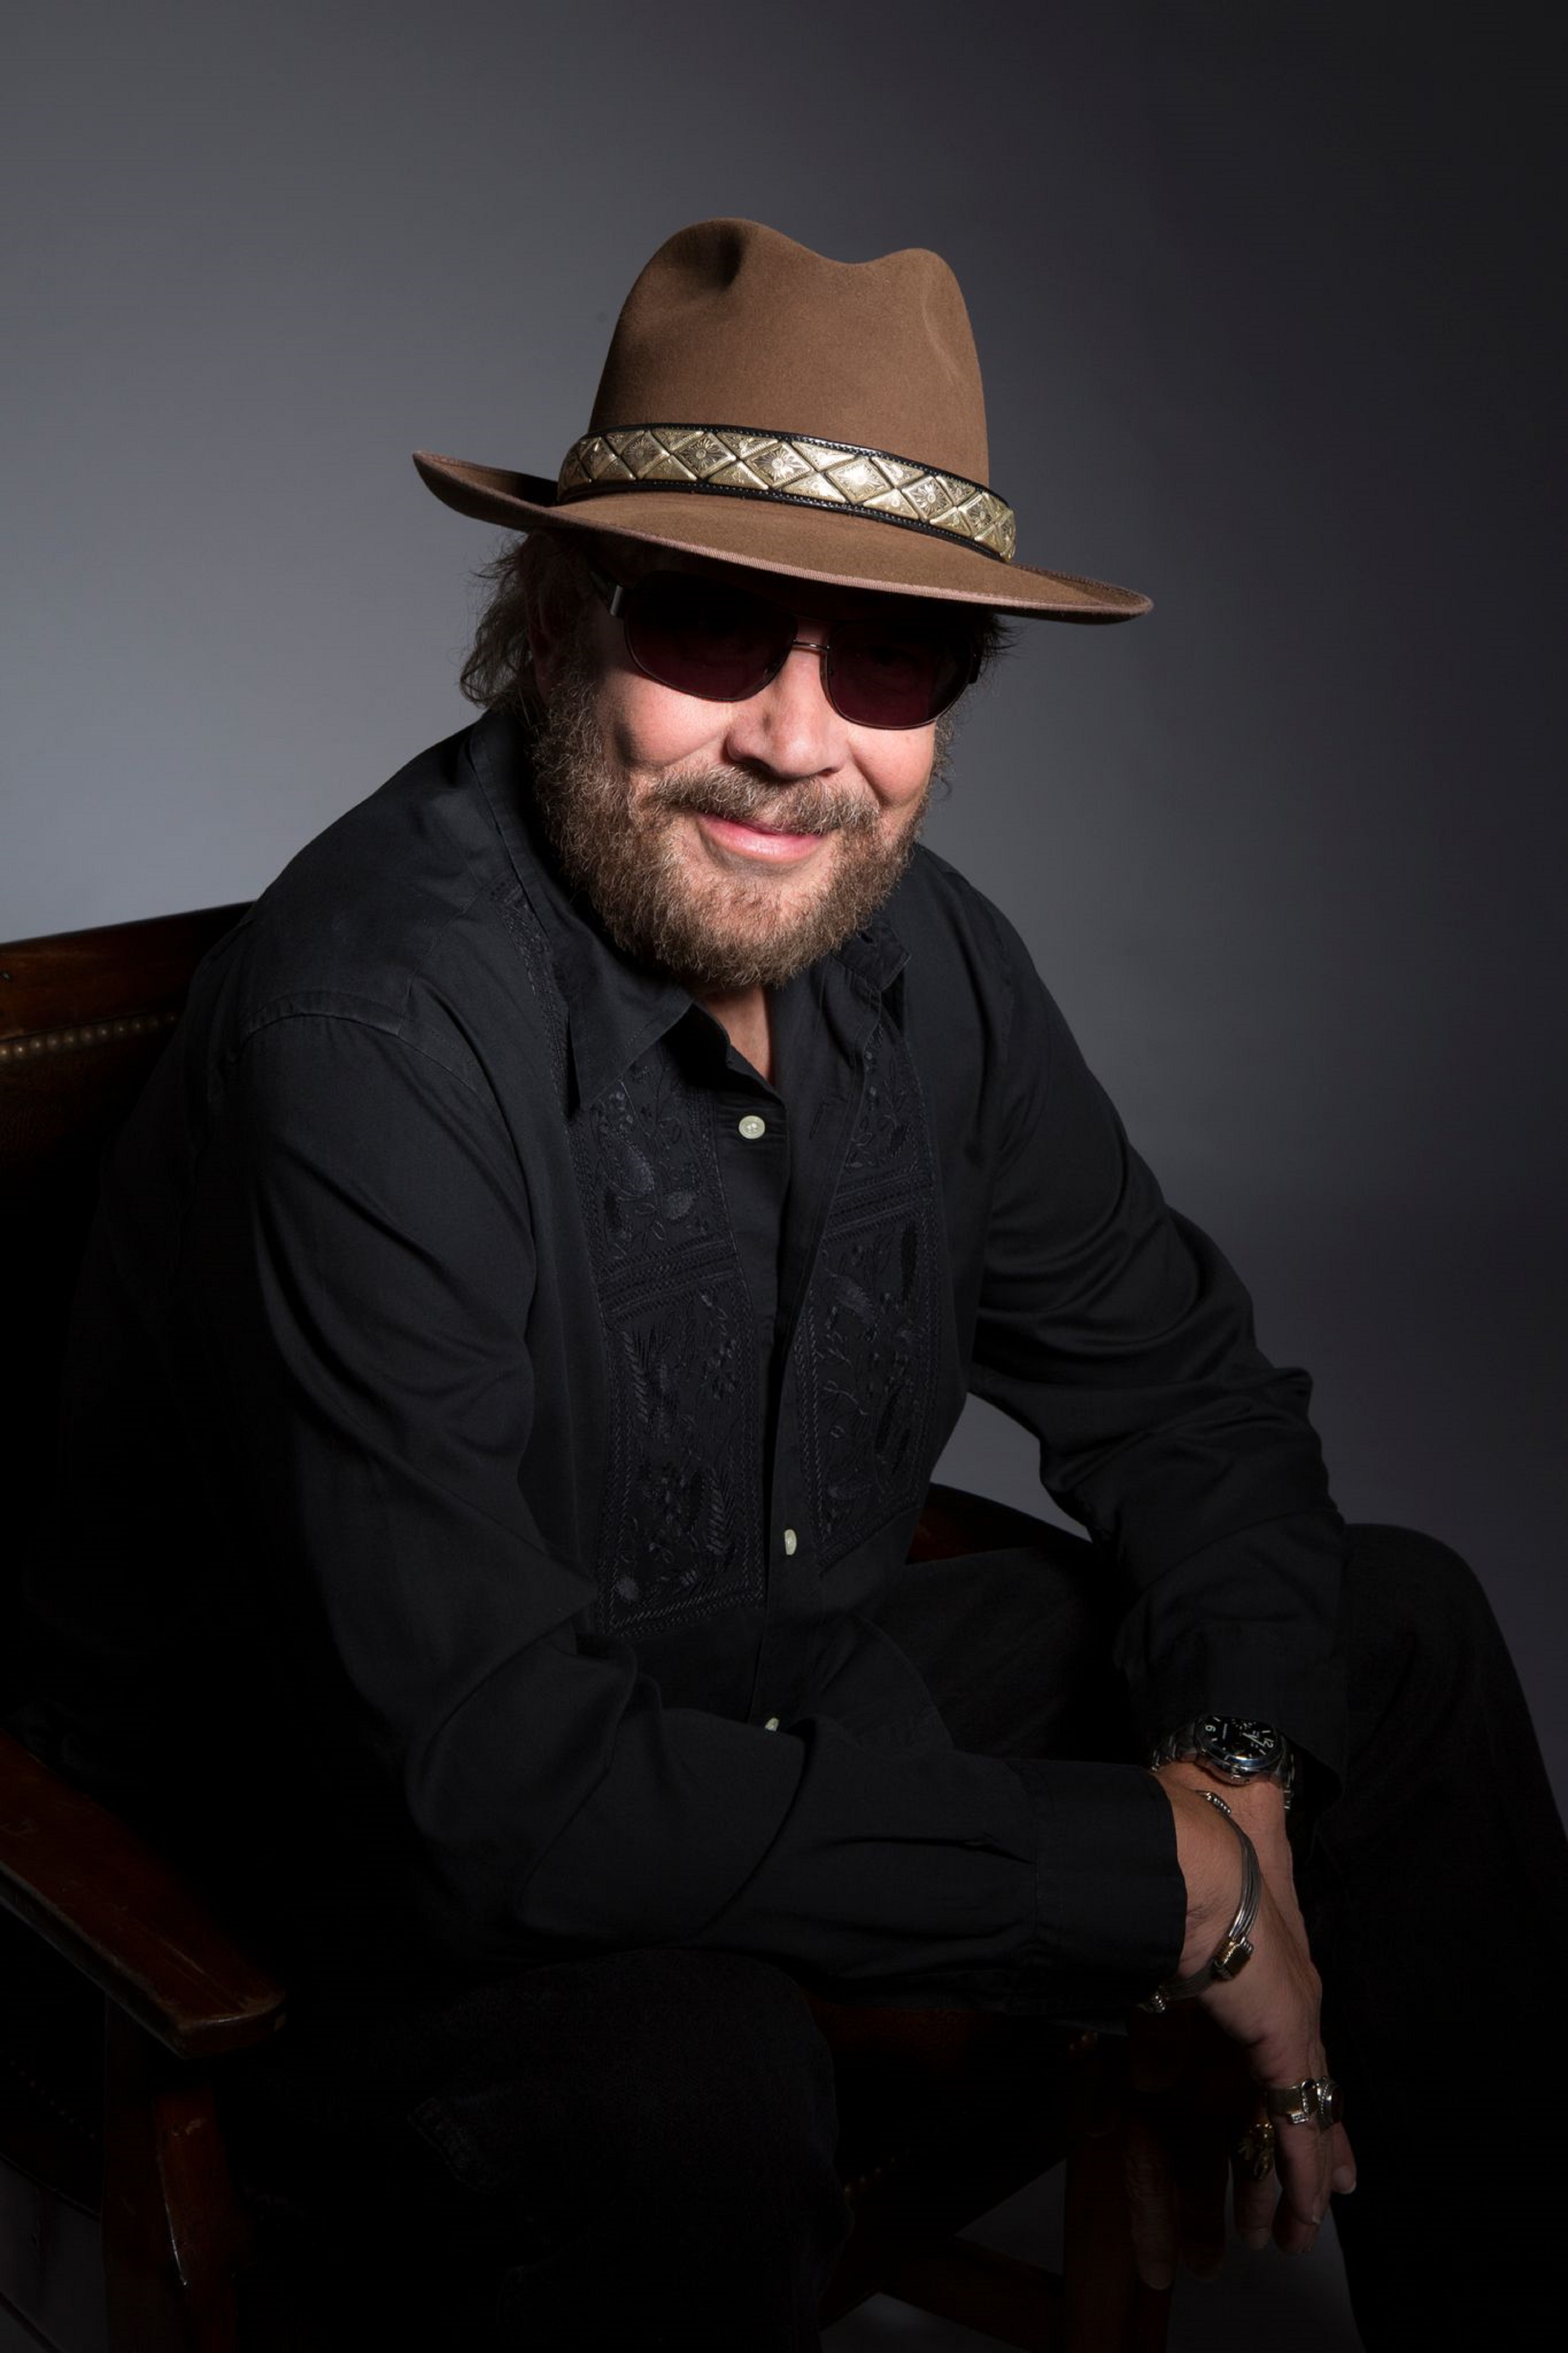 Hank Williams, JR. To Live Stream A Rare Unplugged Performance From Iconic Million Dollar Cowboy Bar